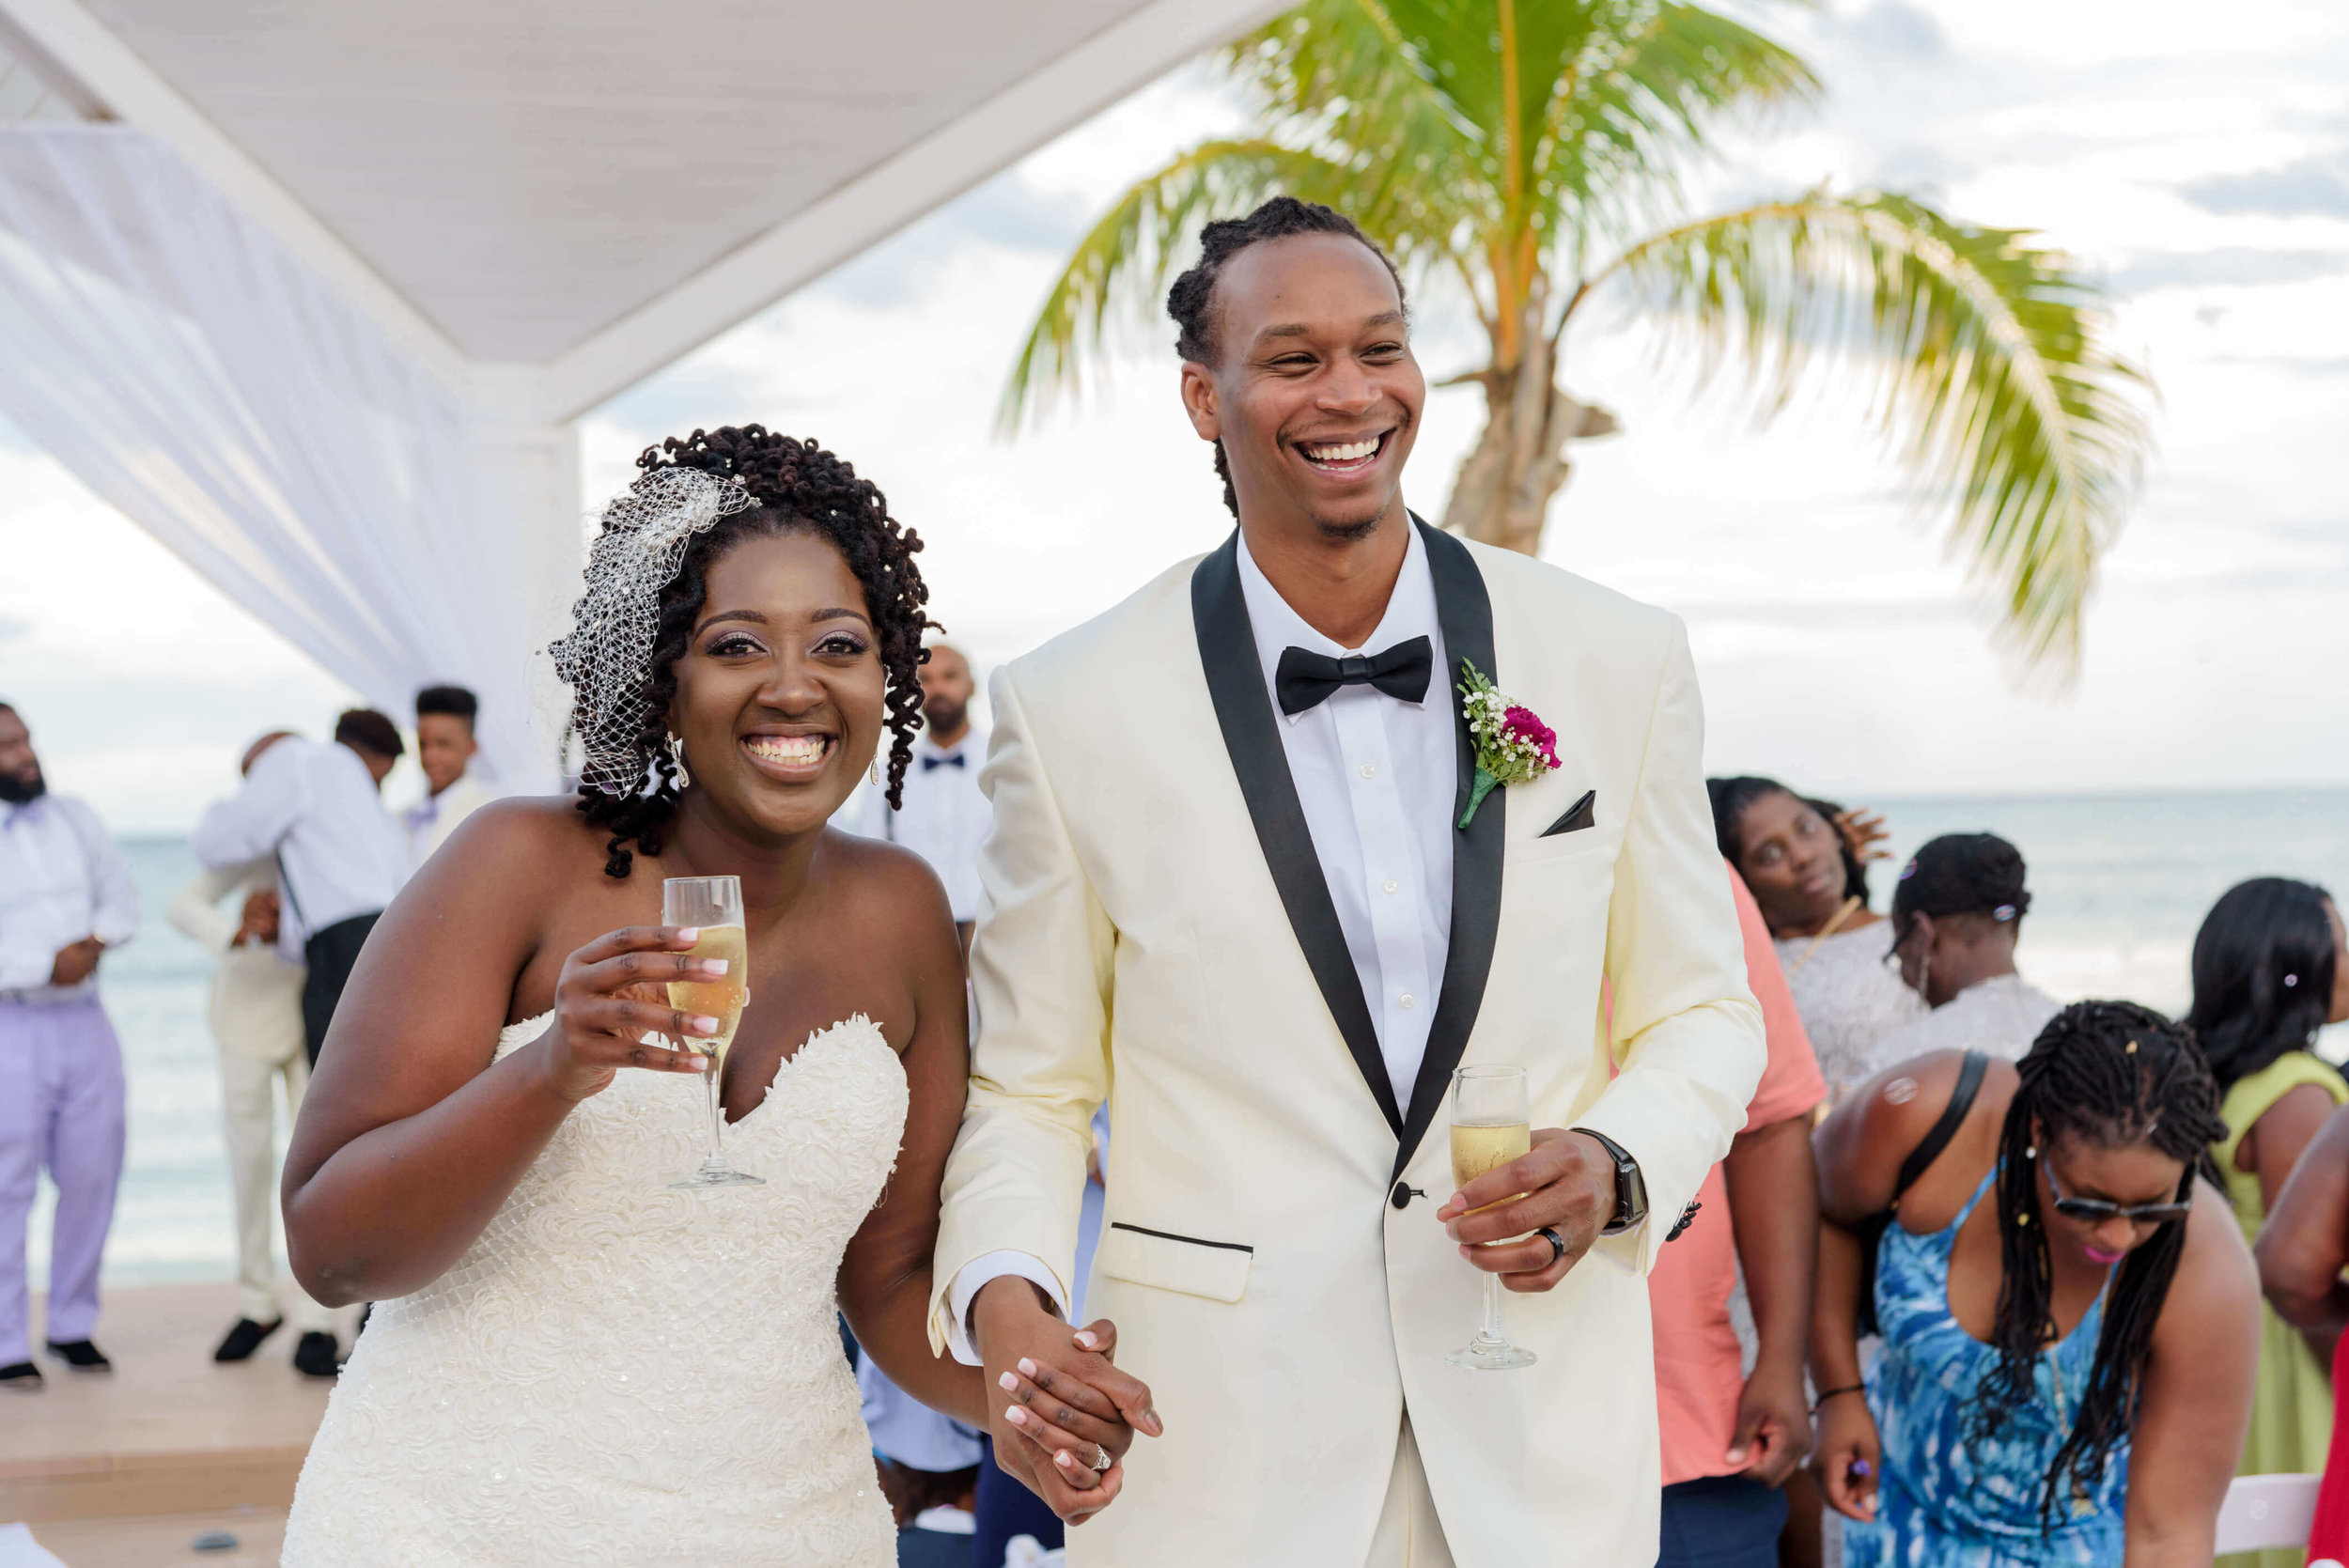 jamellah-how-to-plan-a-destination-wedding-in-montego-bay-jamaica-royalton-blue-waters-black-destination-bride-destiland-desti-guide-to-destination-weddings-couple-after-ceremony.jpg